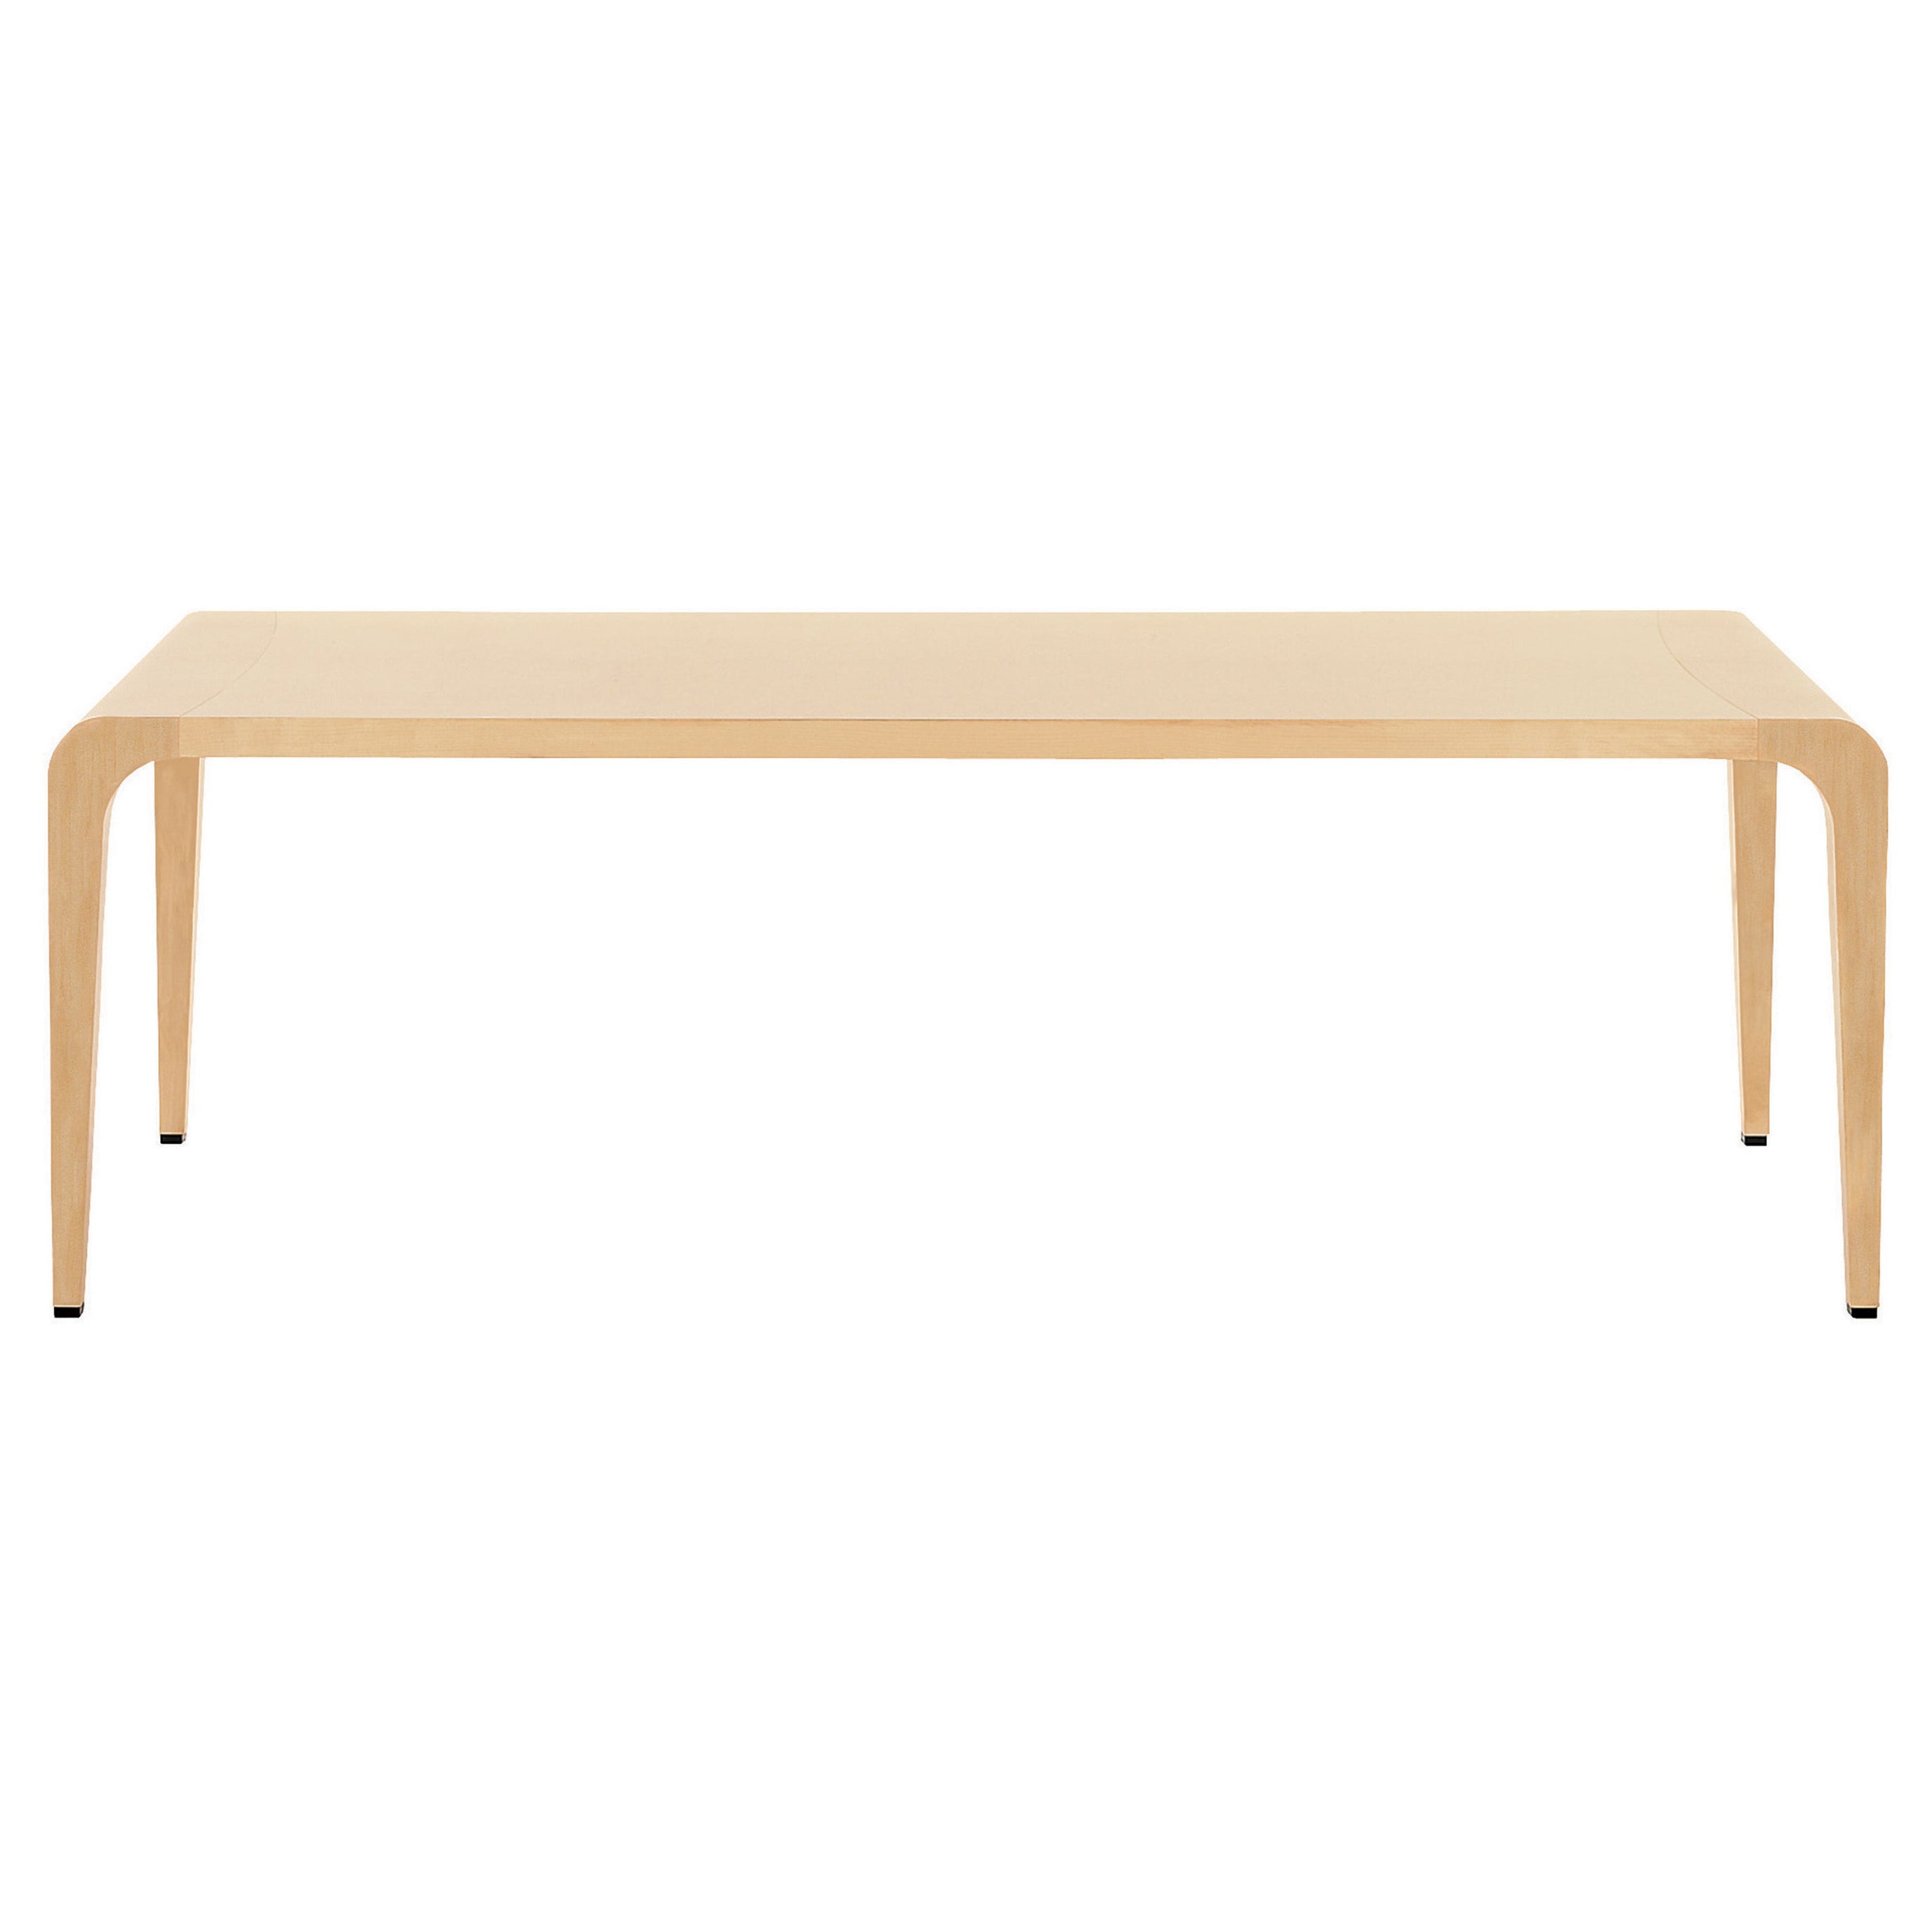 Alias Large 390 Ilvolo Table in Natural Maple Wood Top and Frame For Sale